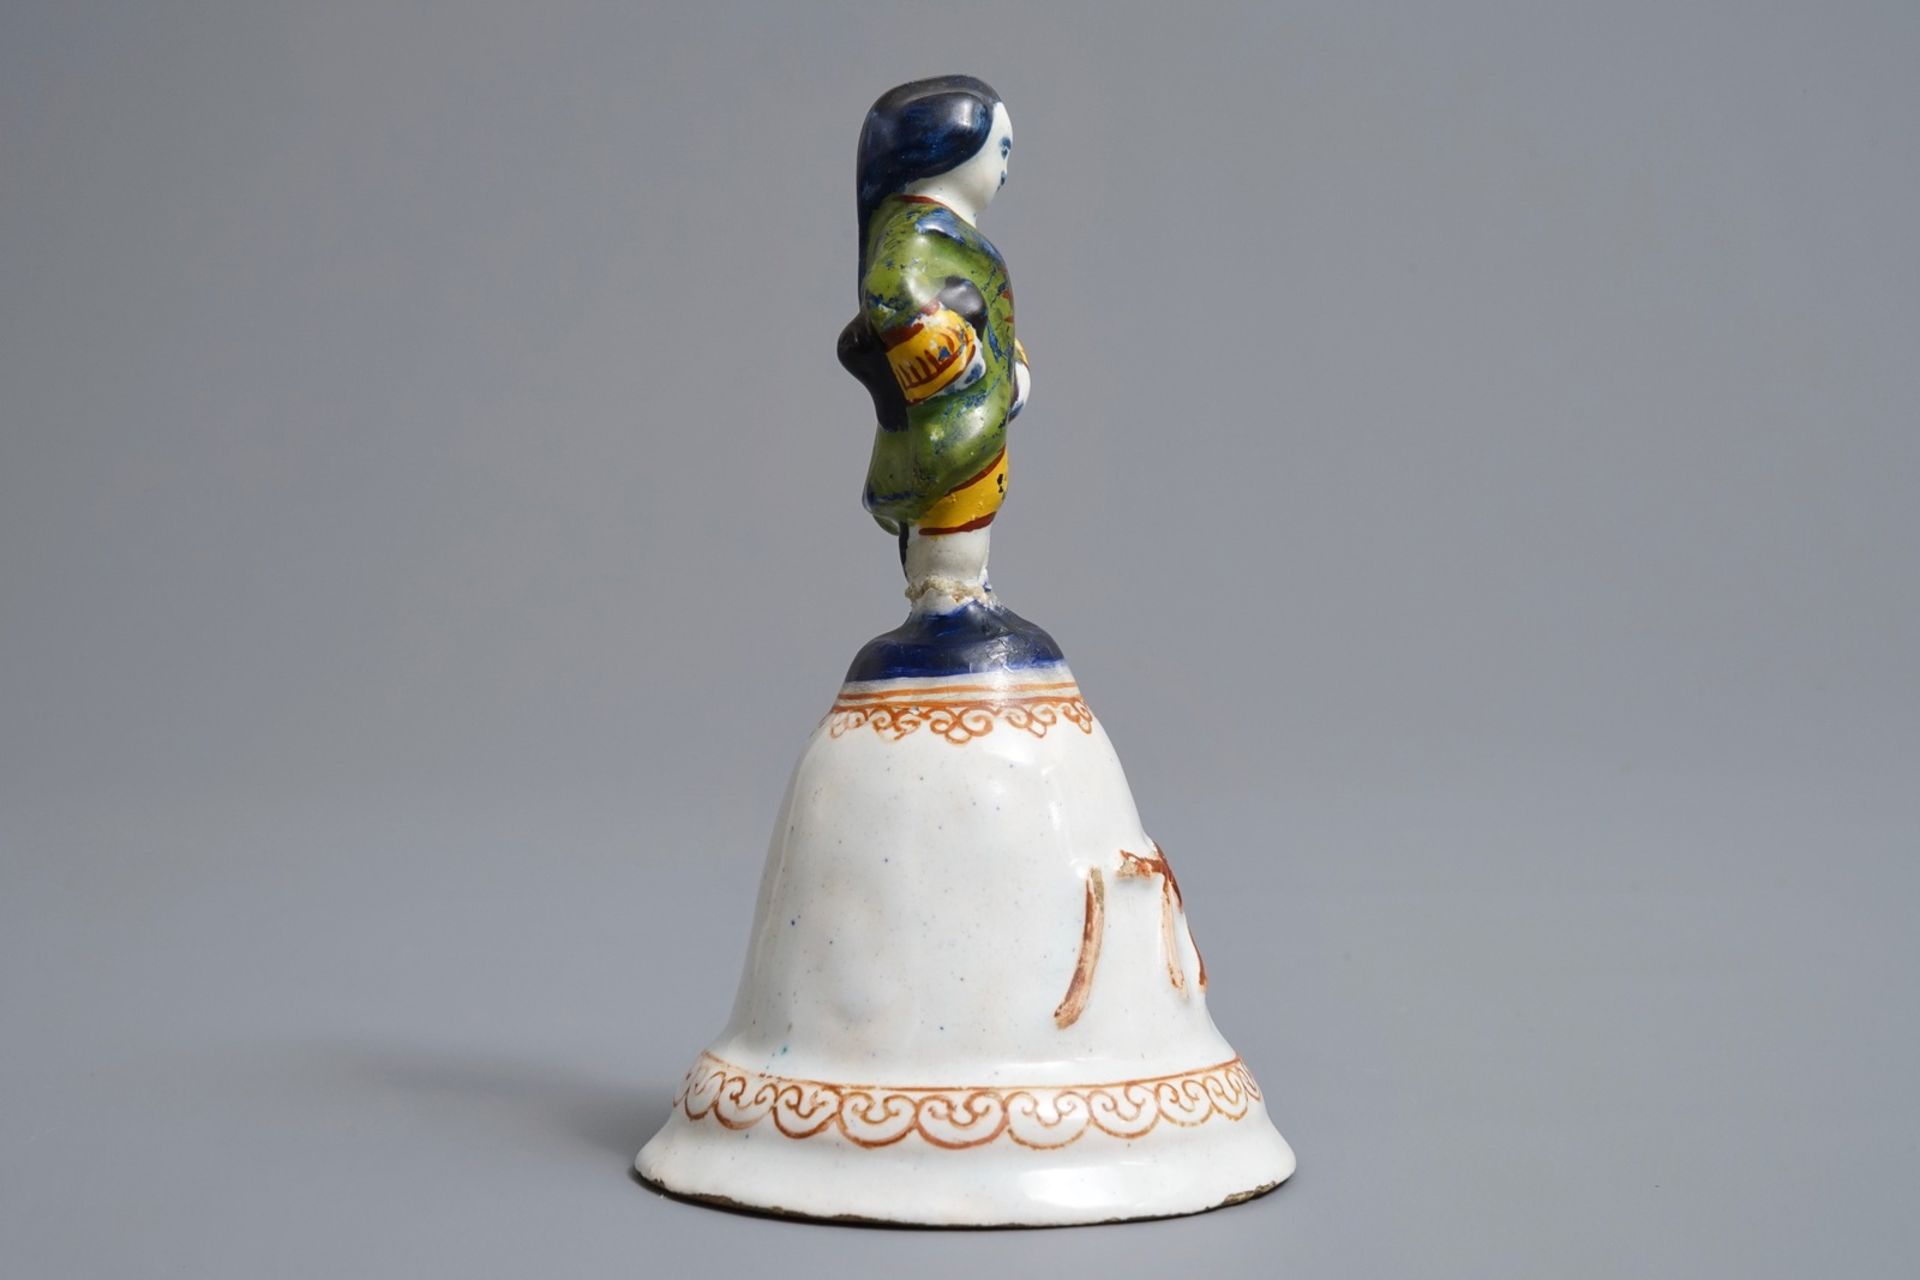 A polychrome Dutch Delft table bell with a noblemand, dated 1796 - Image 3 of 7